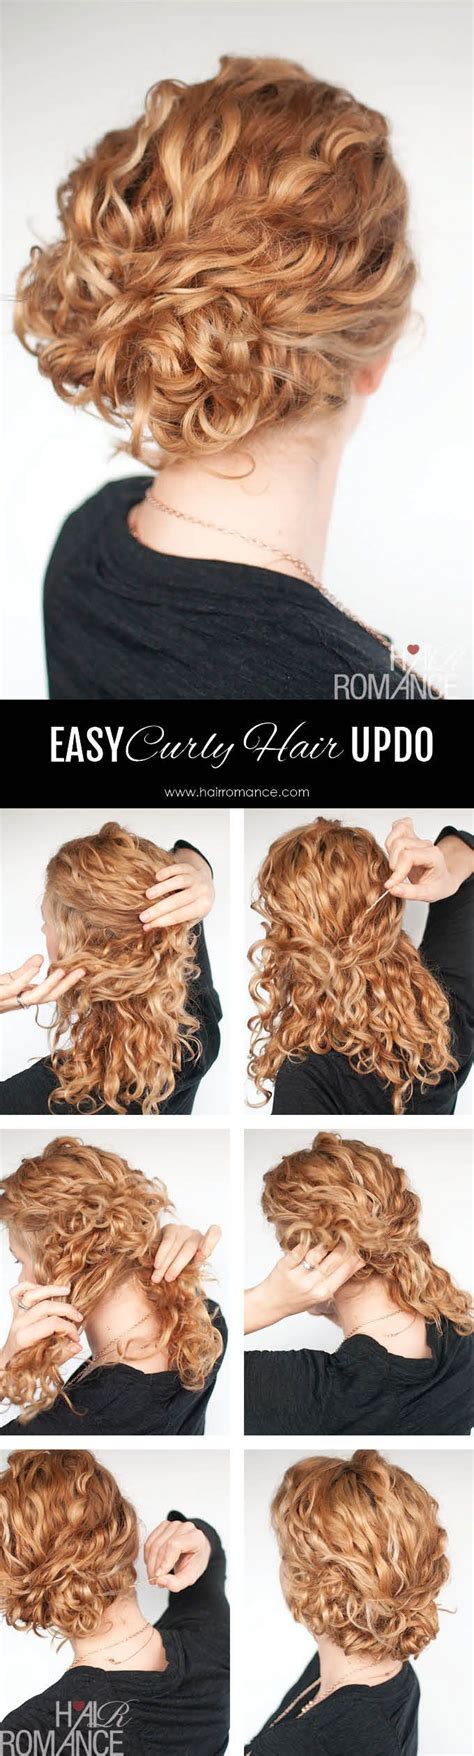 79 Gorgeous Diy Curly Hair Updo For New Style The Ultimate Guide To